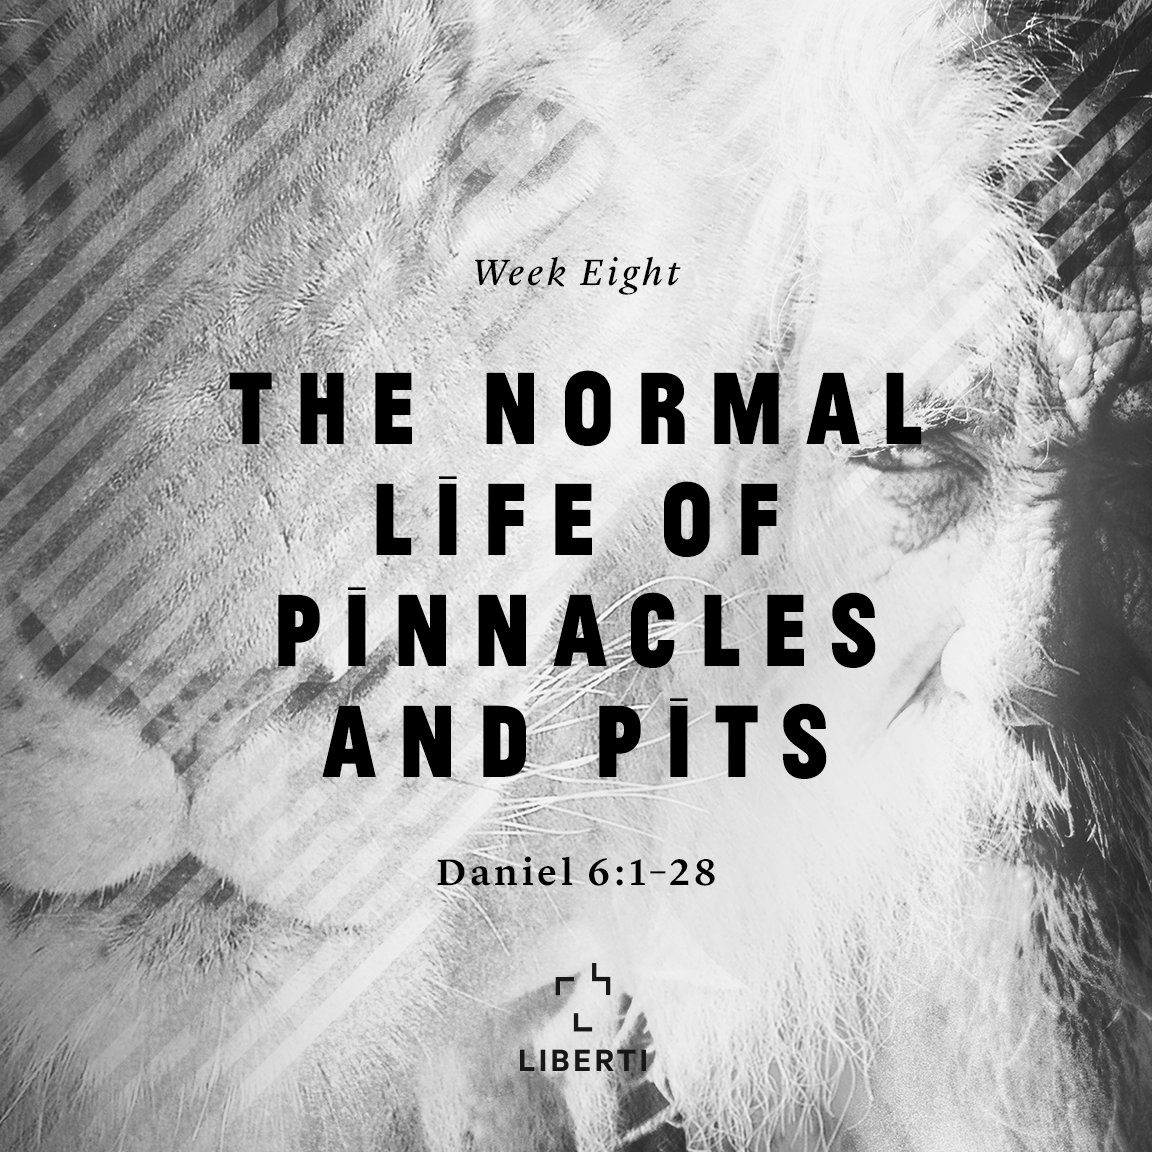 Daniel #8 - The Normal Life of Pinnacles and Pits